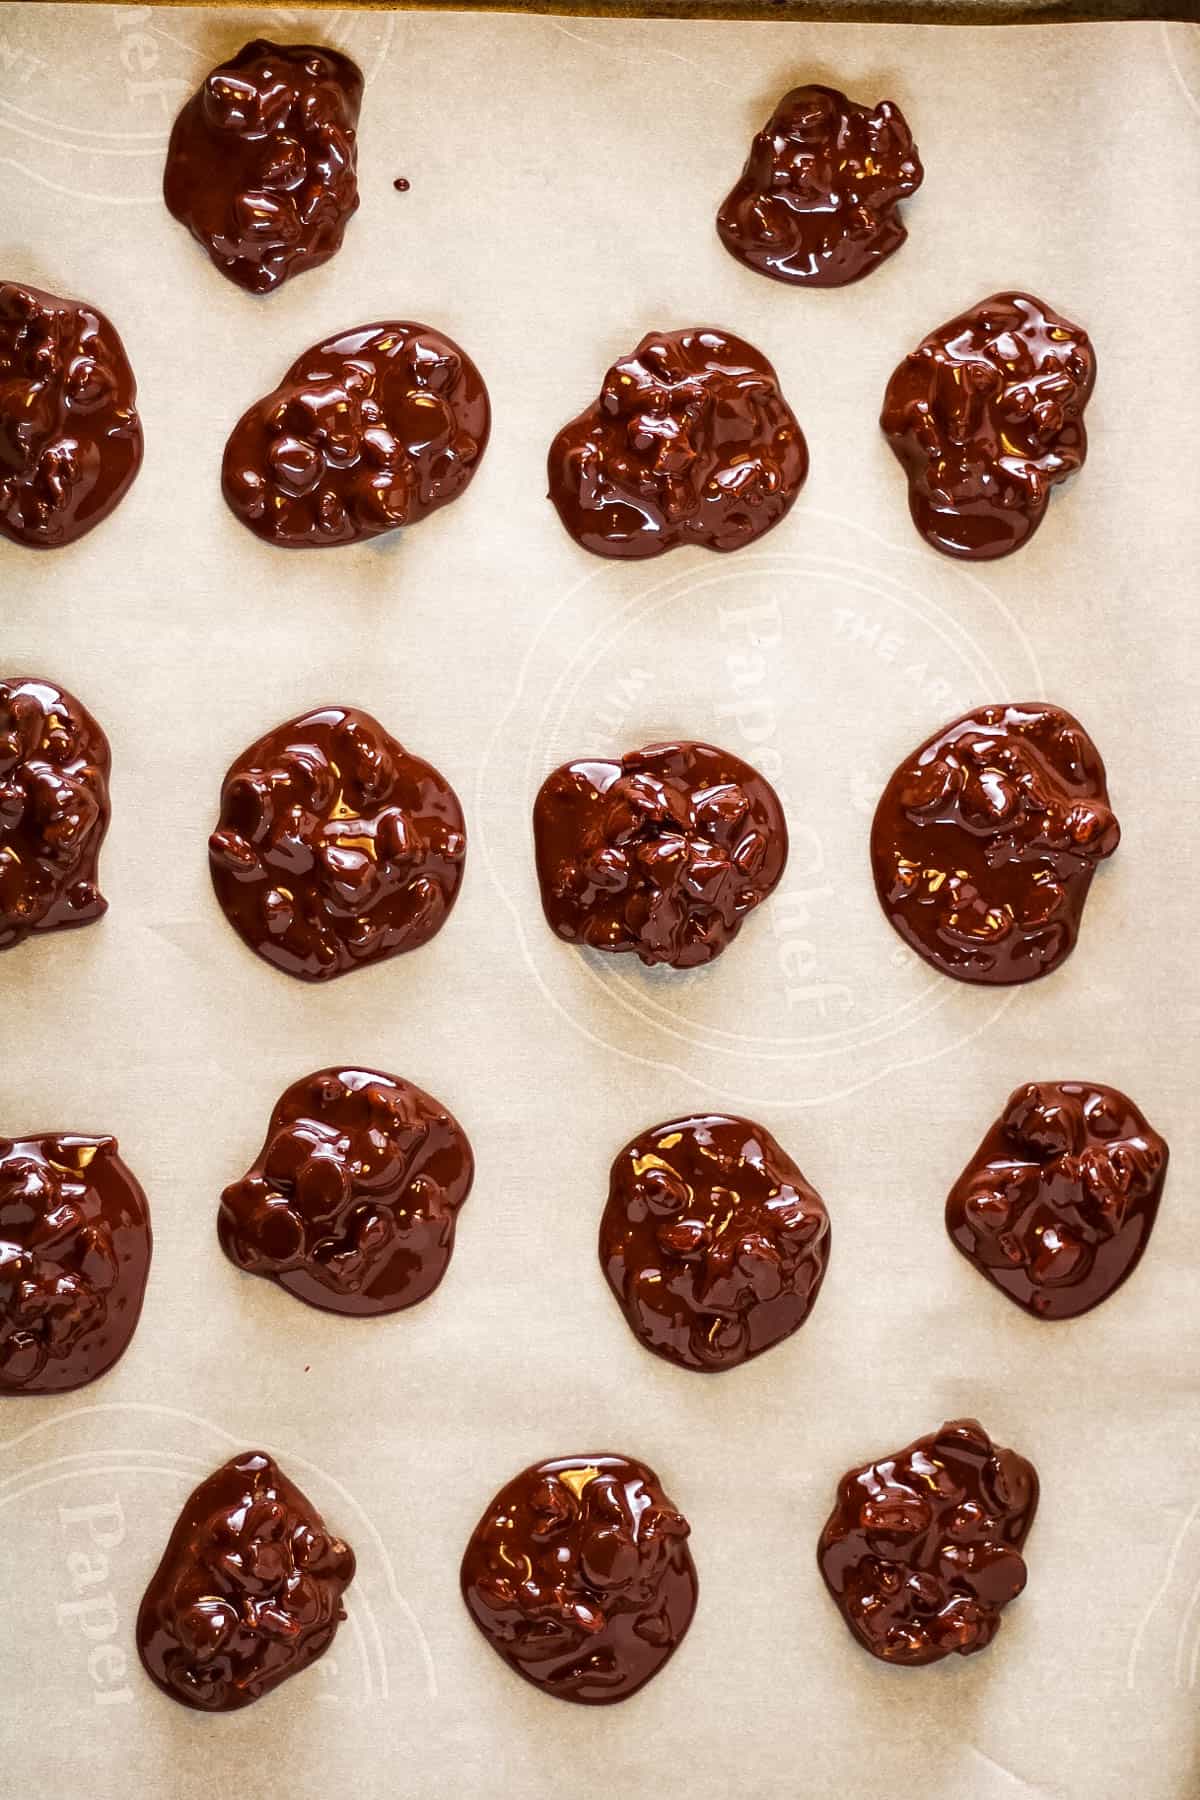 Flourless chocolate-covered cookies arranged on a baking sheet.